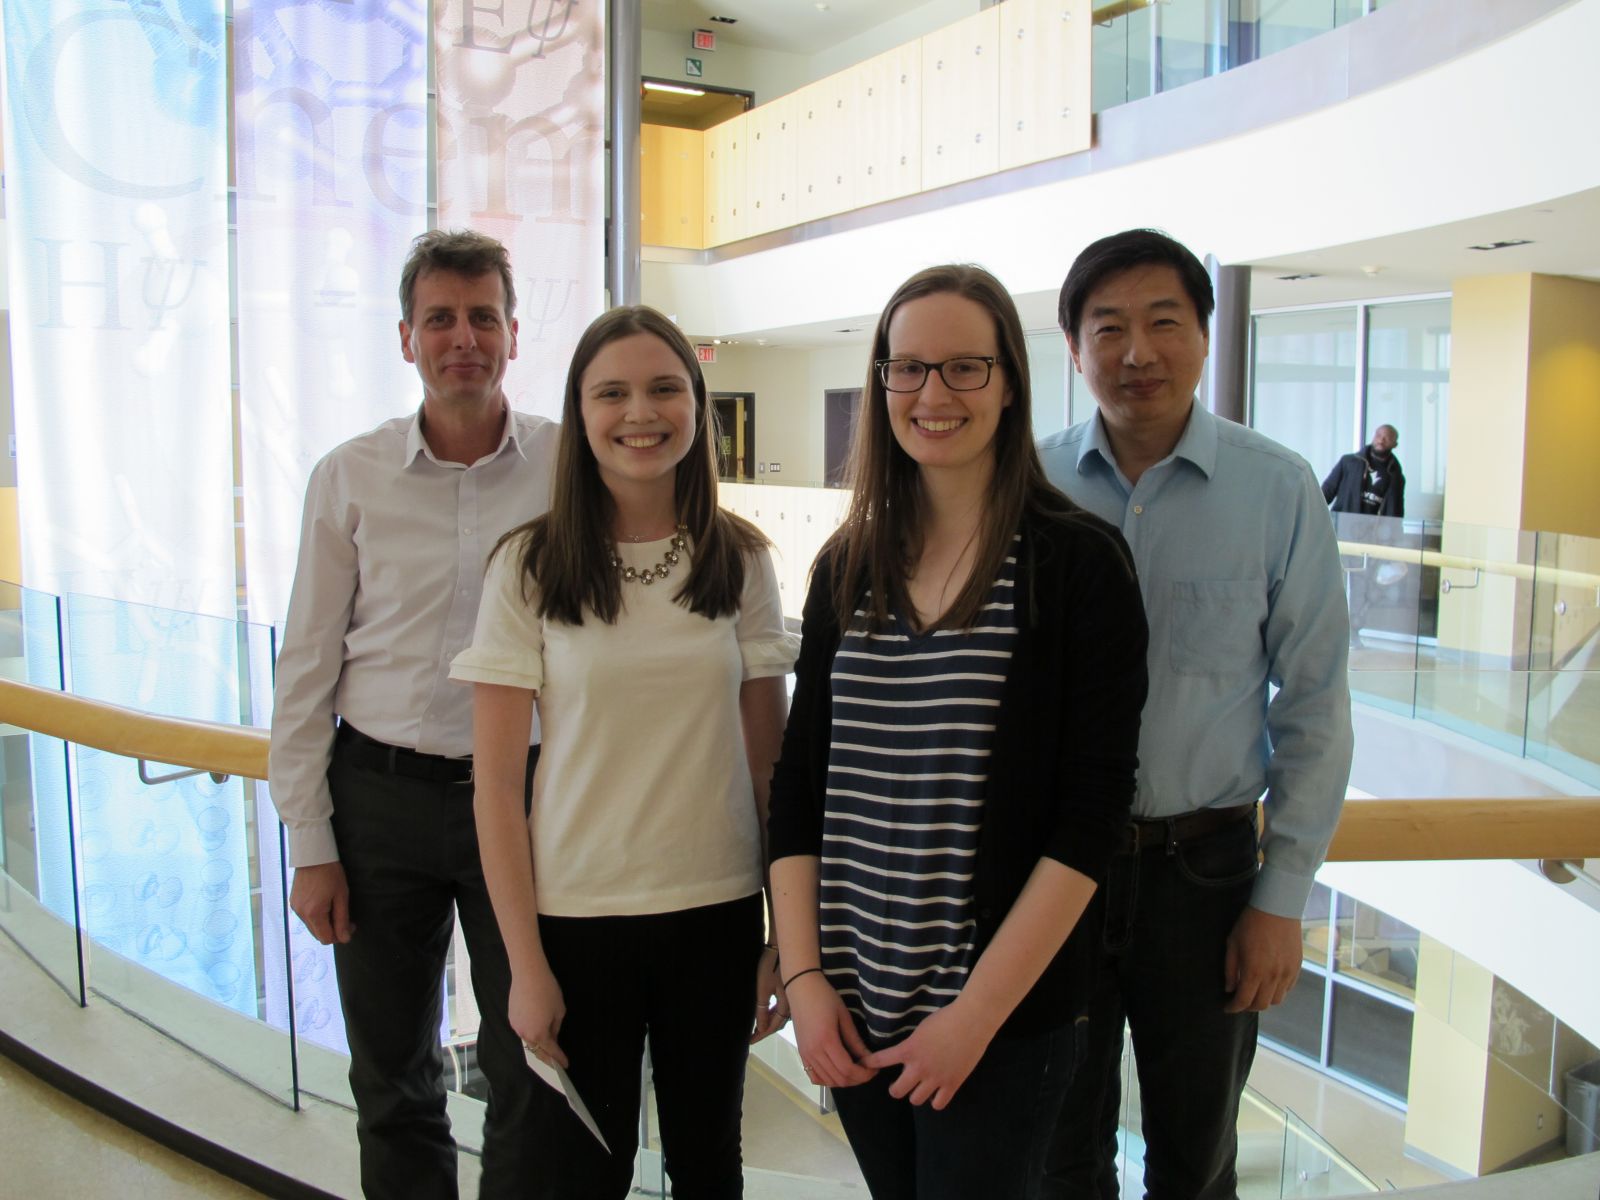 Photo: Dr. Peter Loock, Vanessa Romano, Rebecca Modler and Dr. Gang Wu